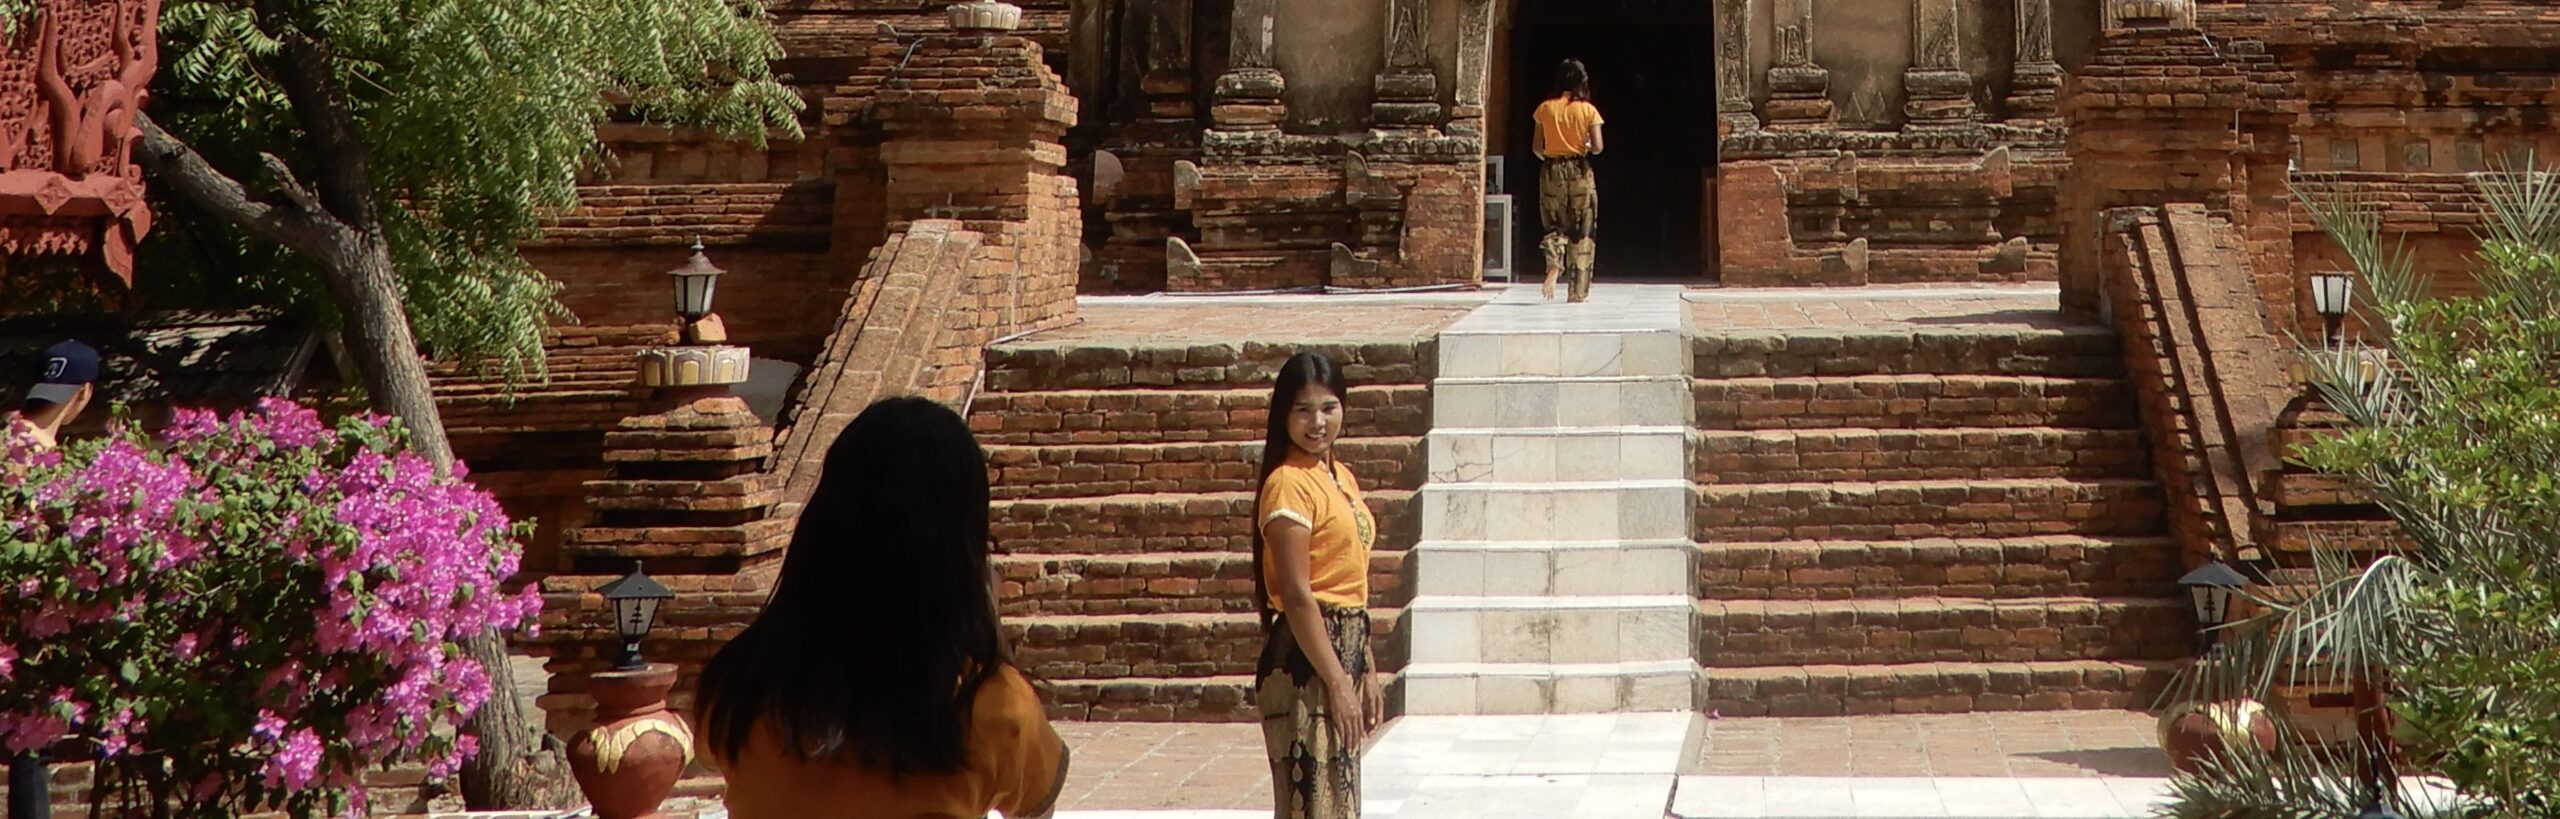 On this day in Bagan